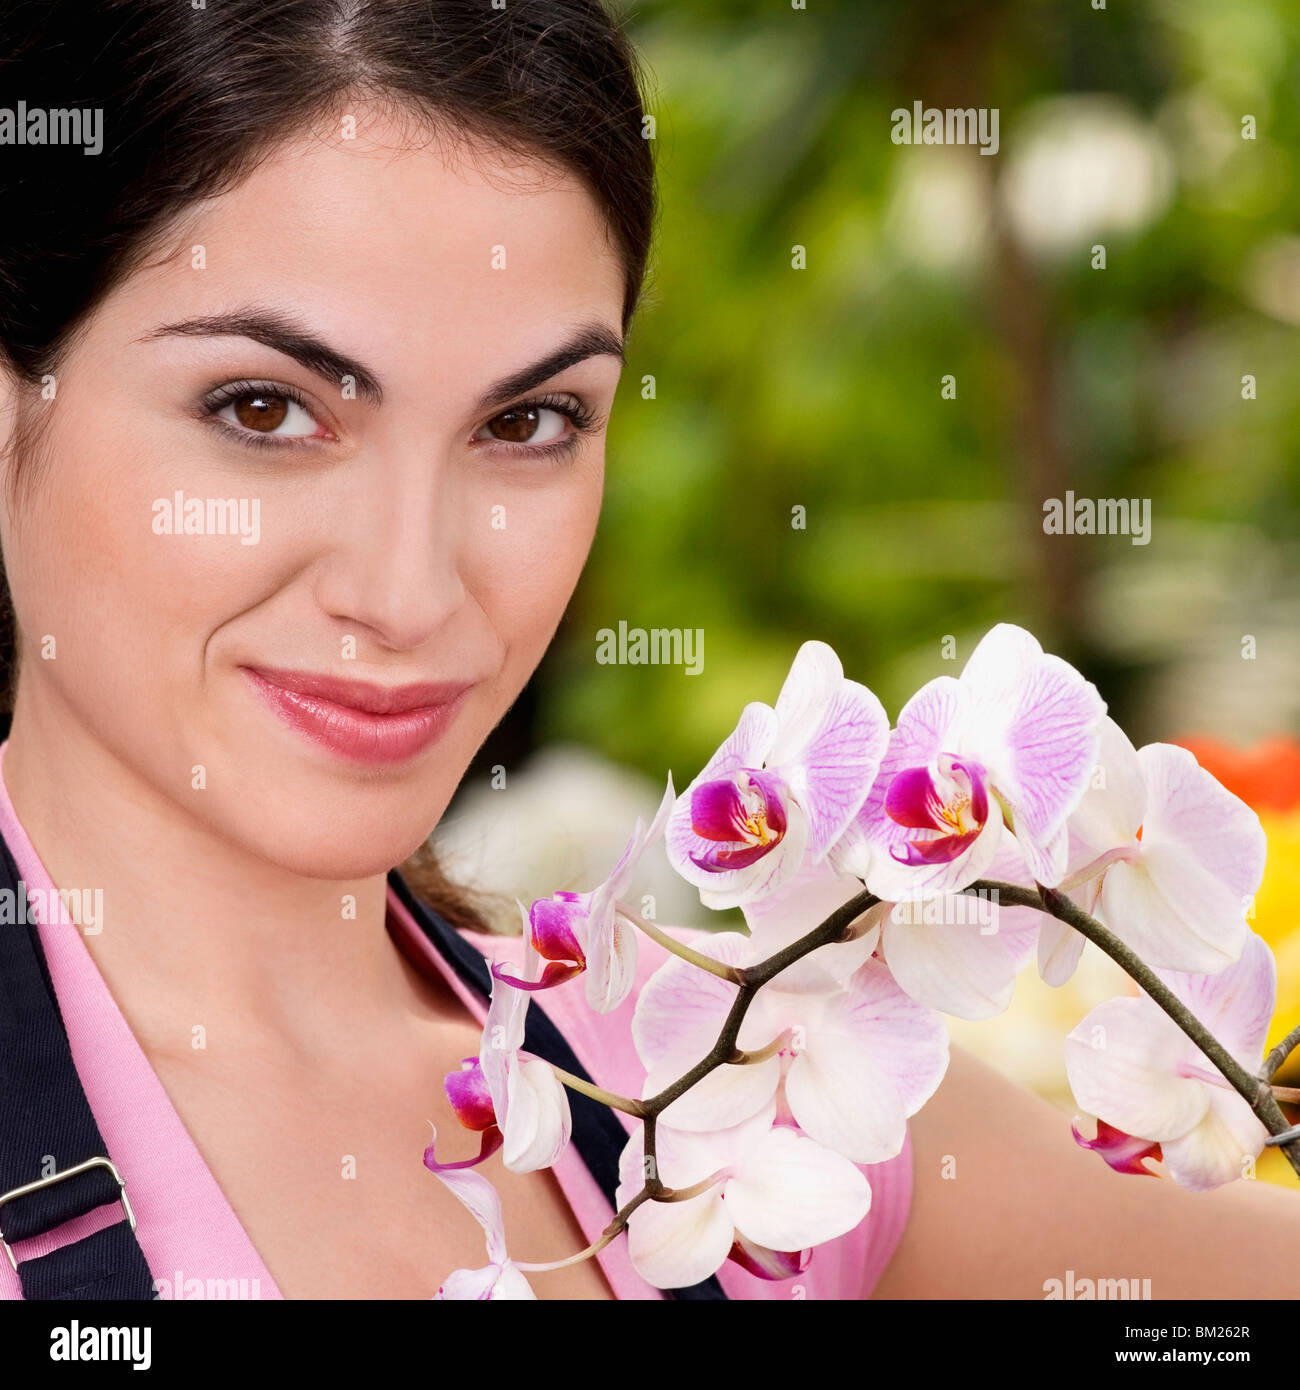 Portrait of a woman smiling in a greenhouse Stock Photo